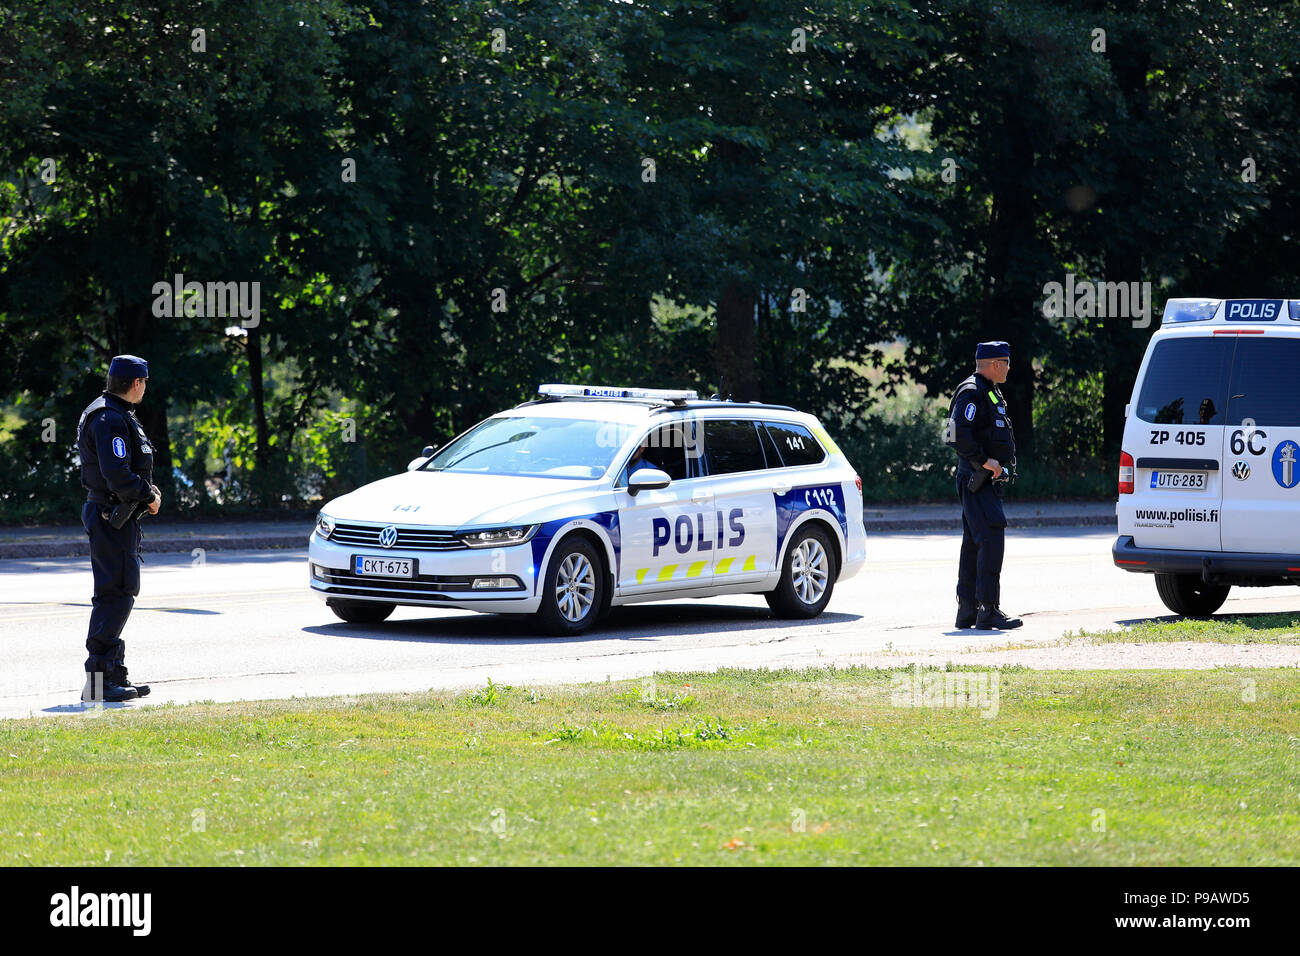 Helsinki, Finland. July 16, 2018. Police officers and vehicles in Helsinki on the day of the US and Russian Presidents' historic Helsinki2018 meeting. Credit: Taina Sohlman/Alamy Live News Stock Photo